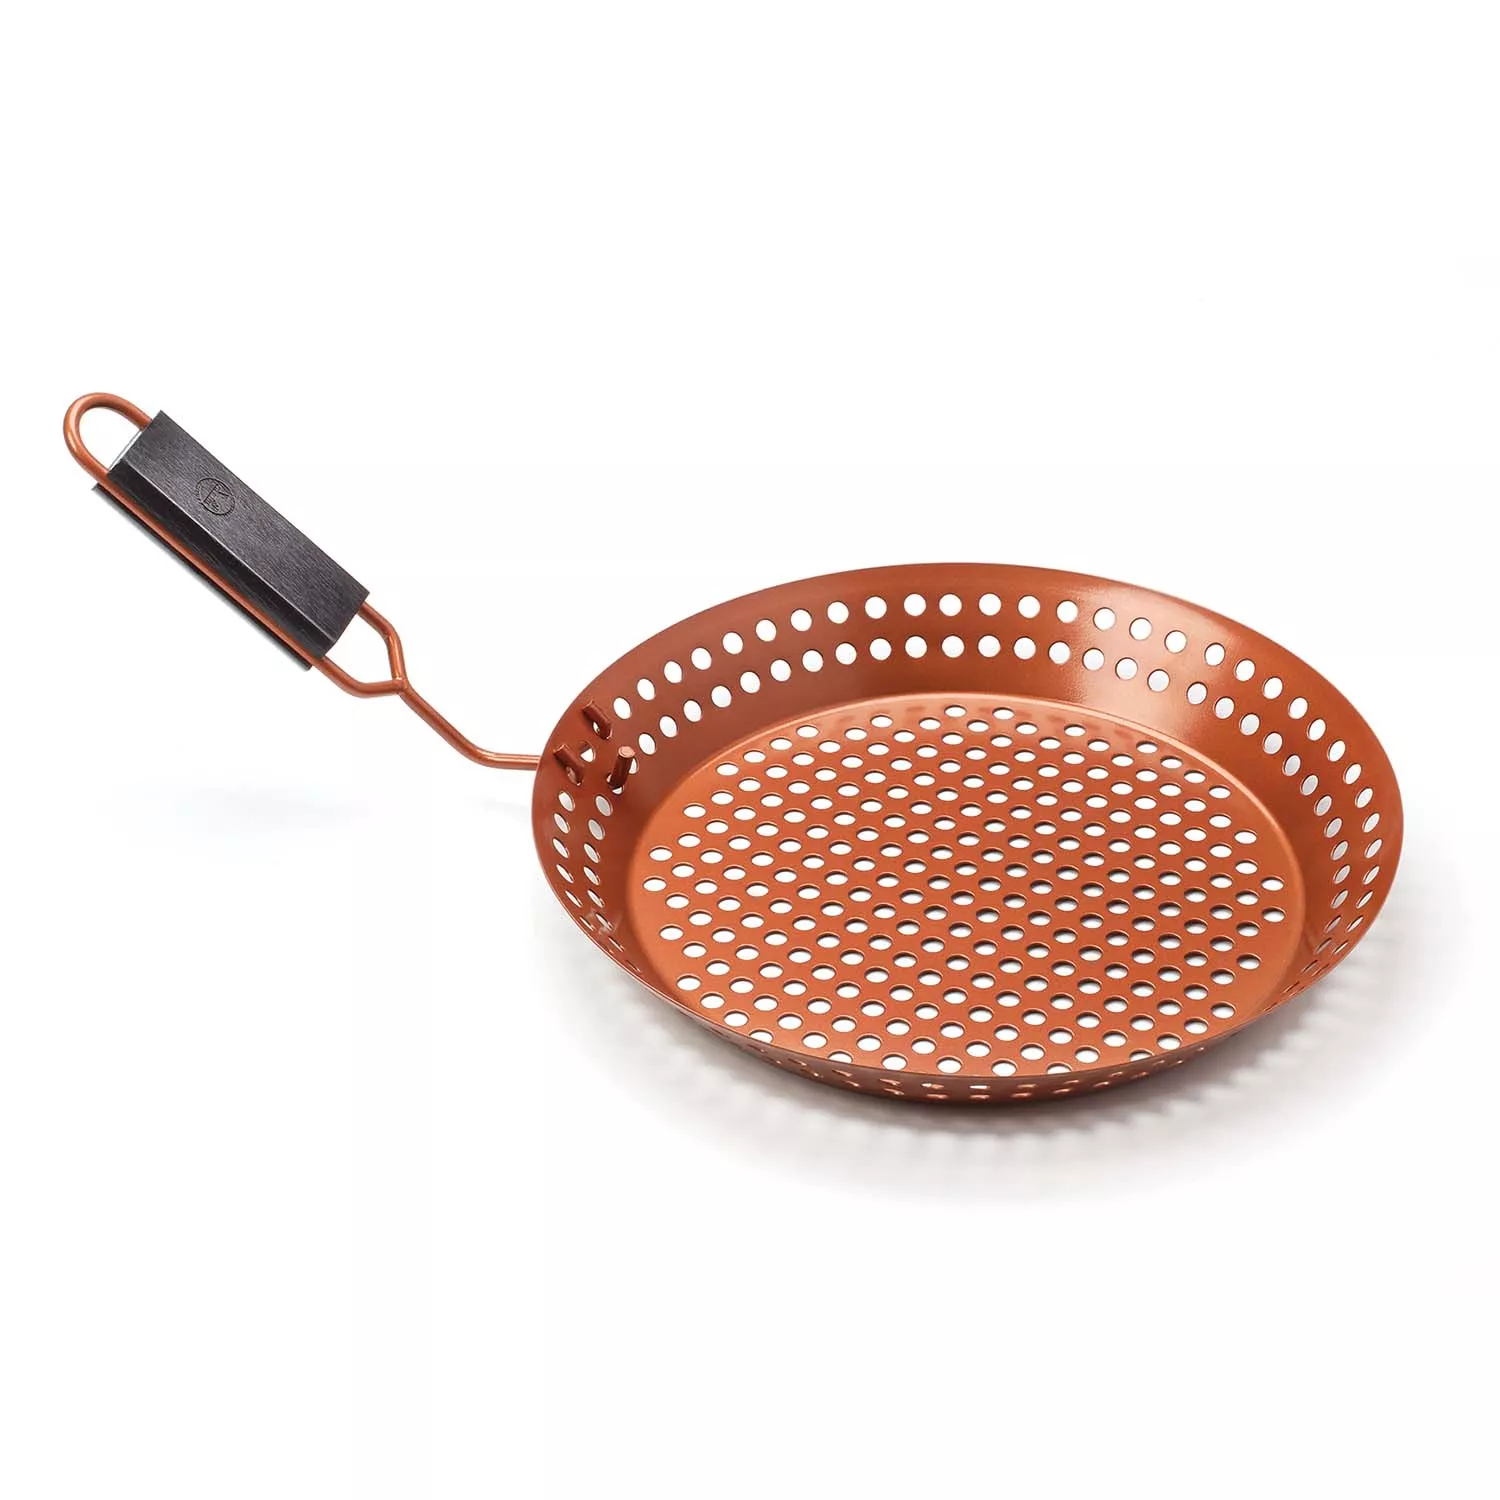 Outset Grill Skillet with Removable Handle - Copper